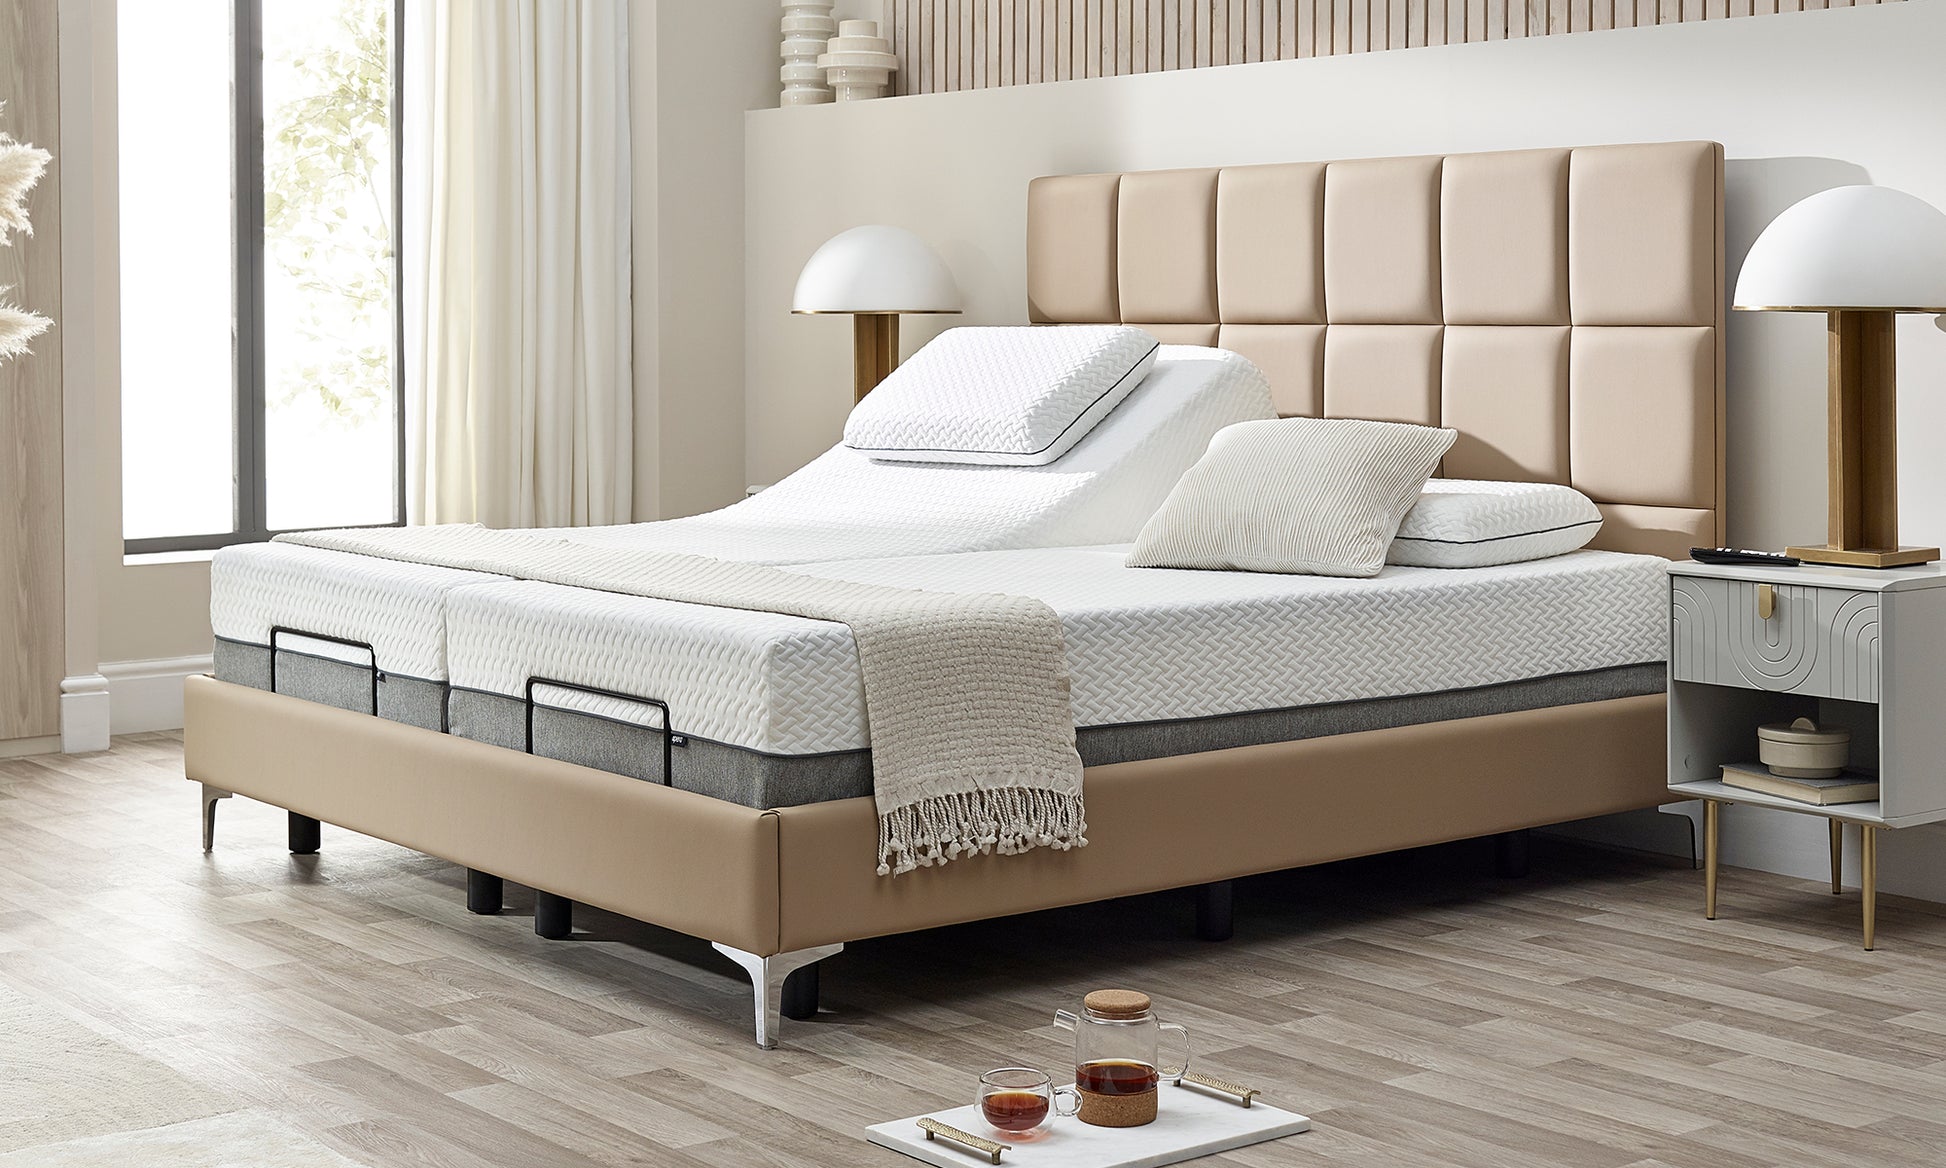 Borg adjustable bed 6ft dual